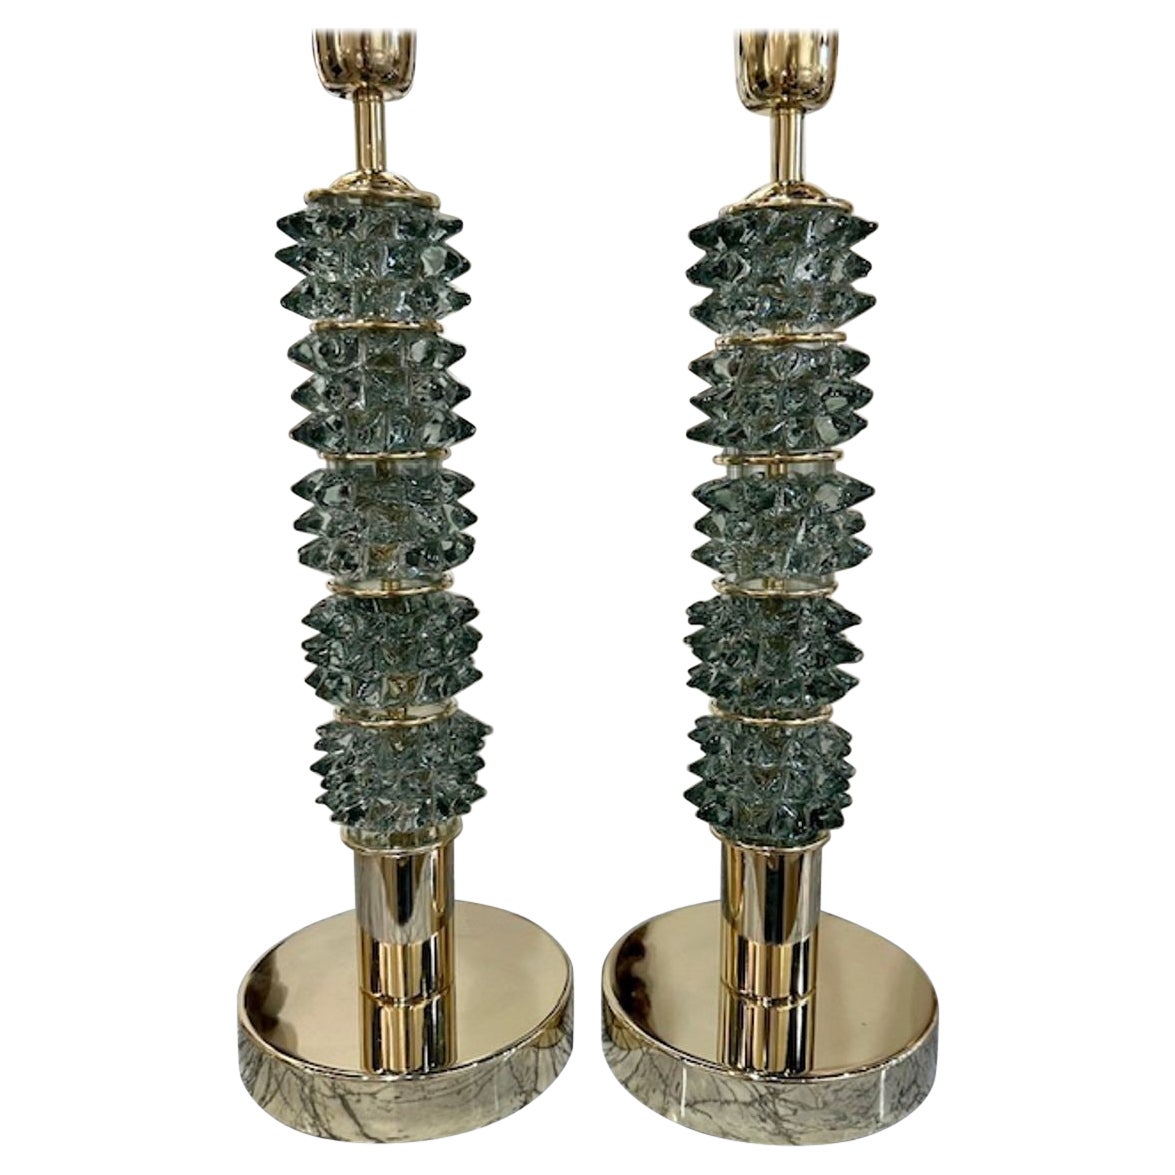 Pair of Modern Glass and Brass "Rostri" Lamps in Fontana Green For Sale